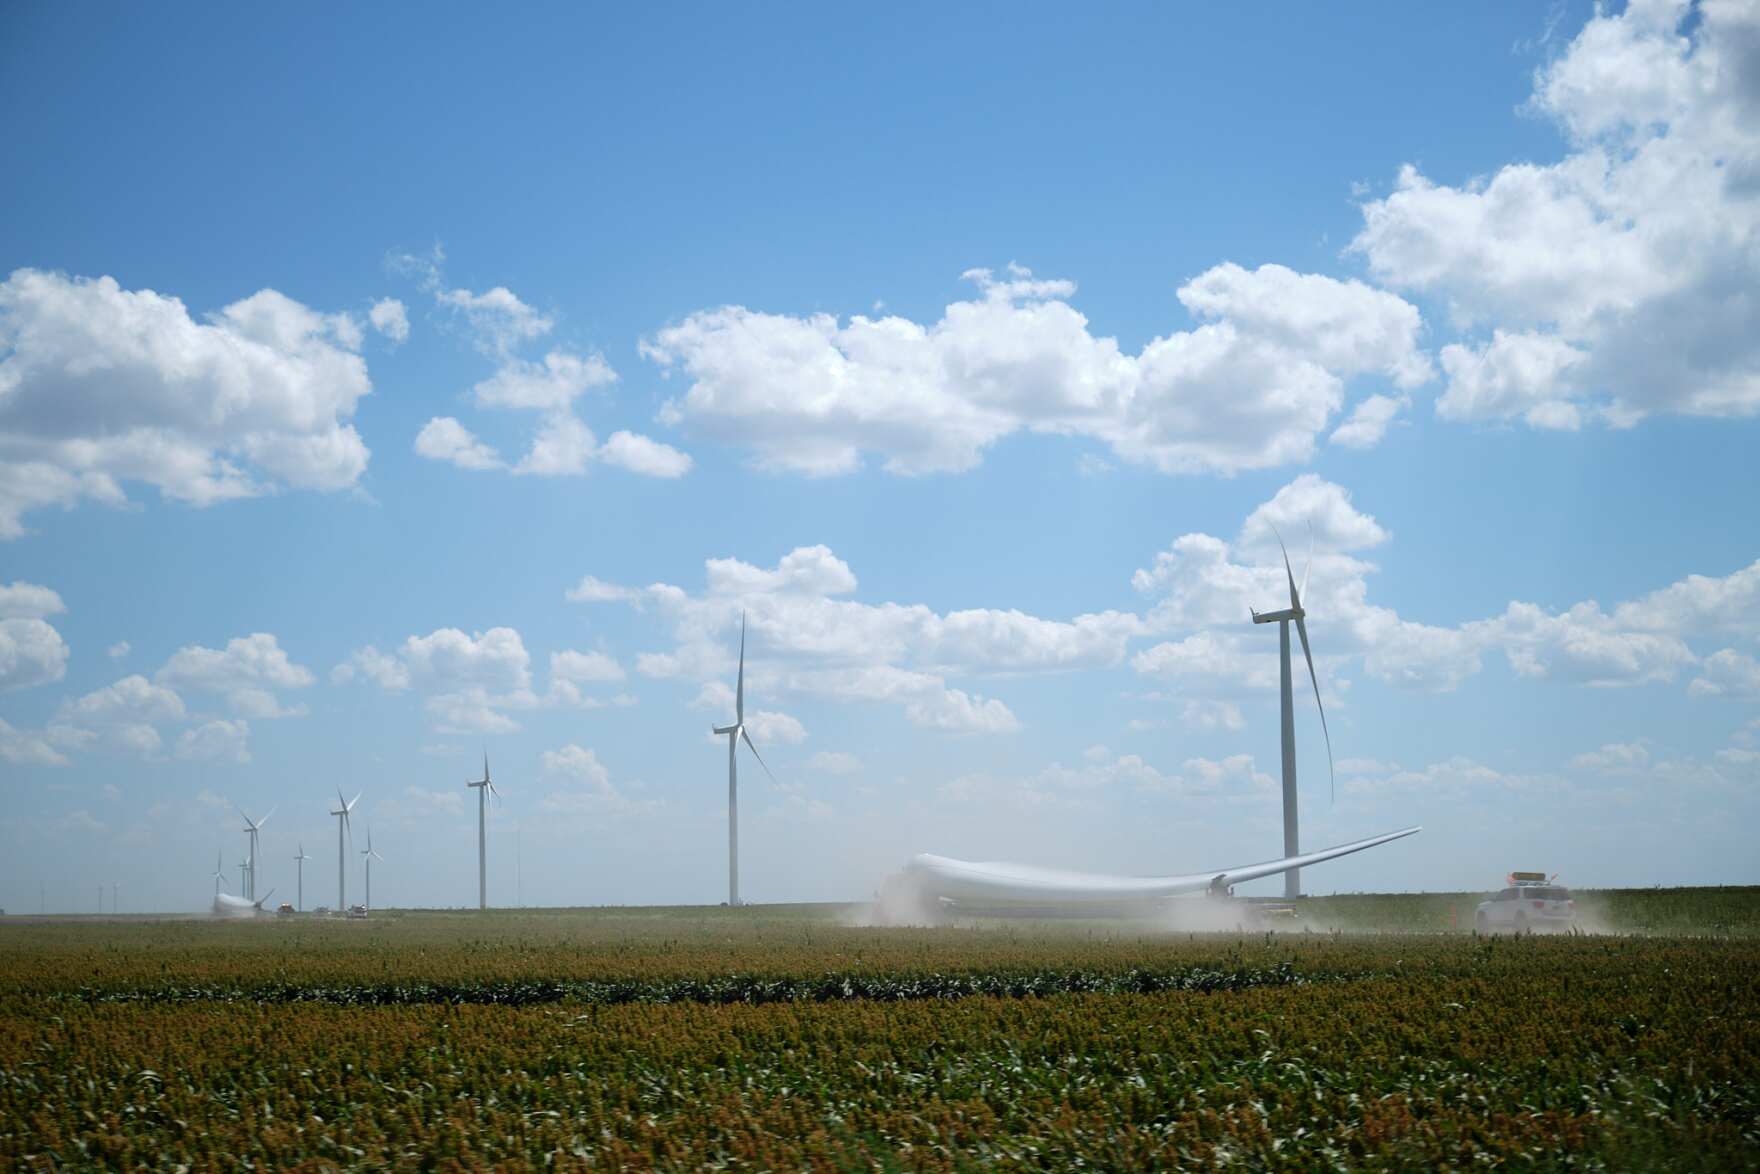 a landscape shot of a large farm field with seven wind turbines dotting the landscape. one turbine blade lies on the ground